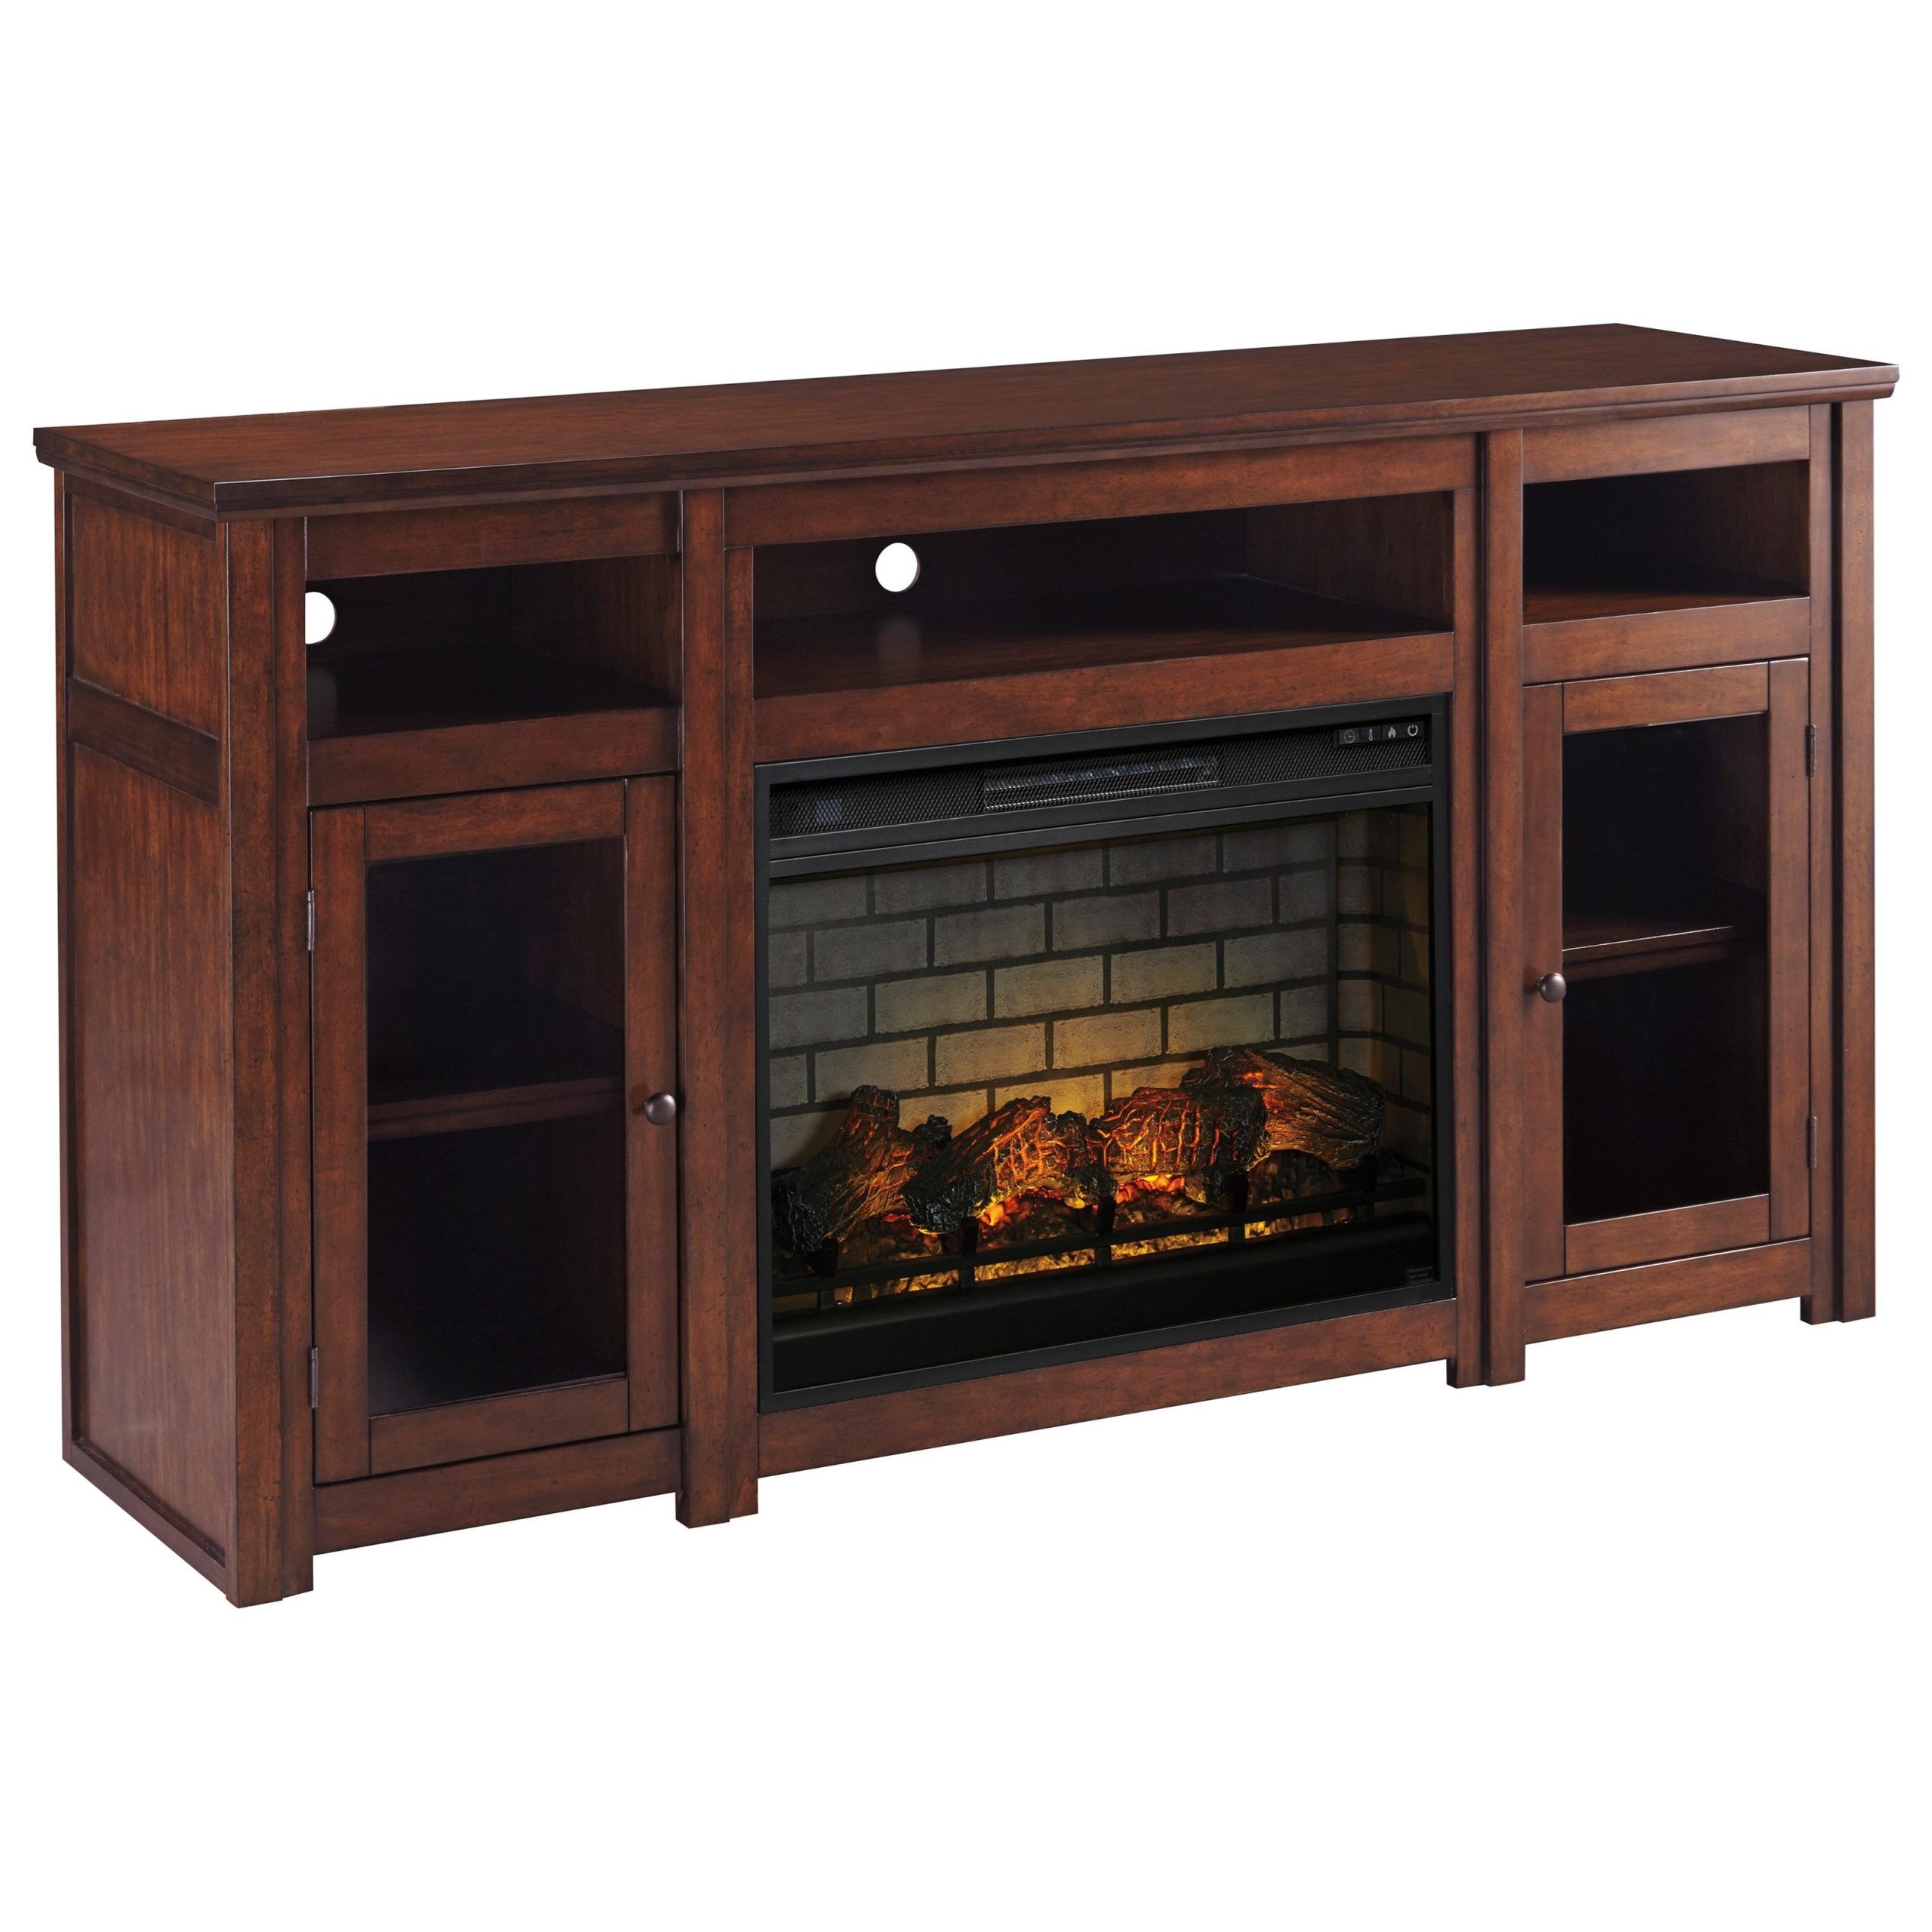 Signature Designashley Harpan Transitional Extra Large Tv Stand Pertaining To Modern Fireplace Tv Stands (View 14 of 20)